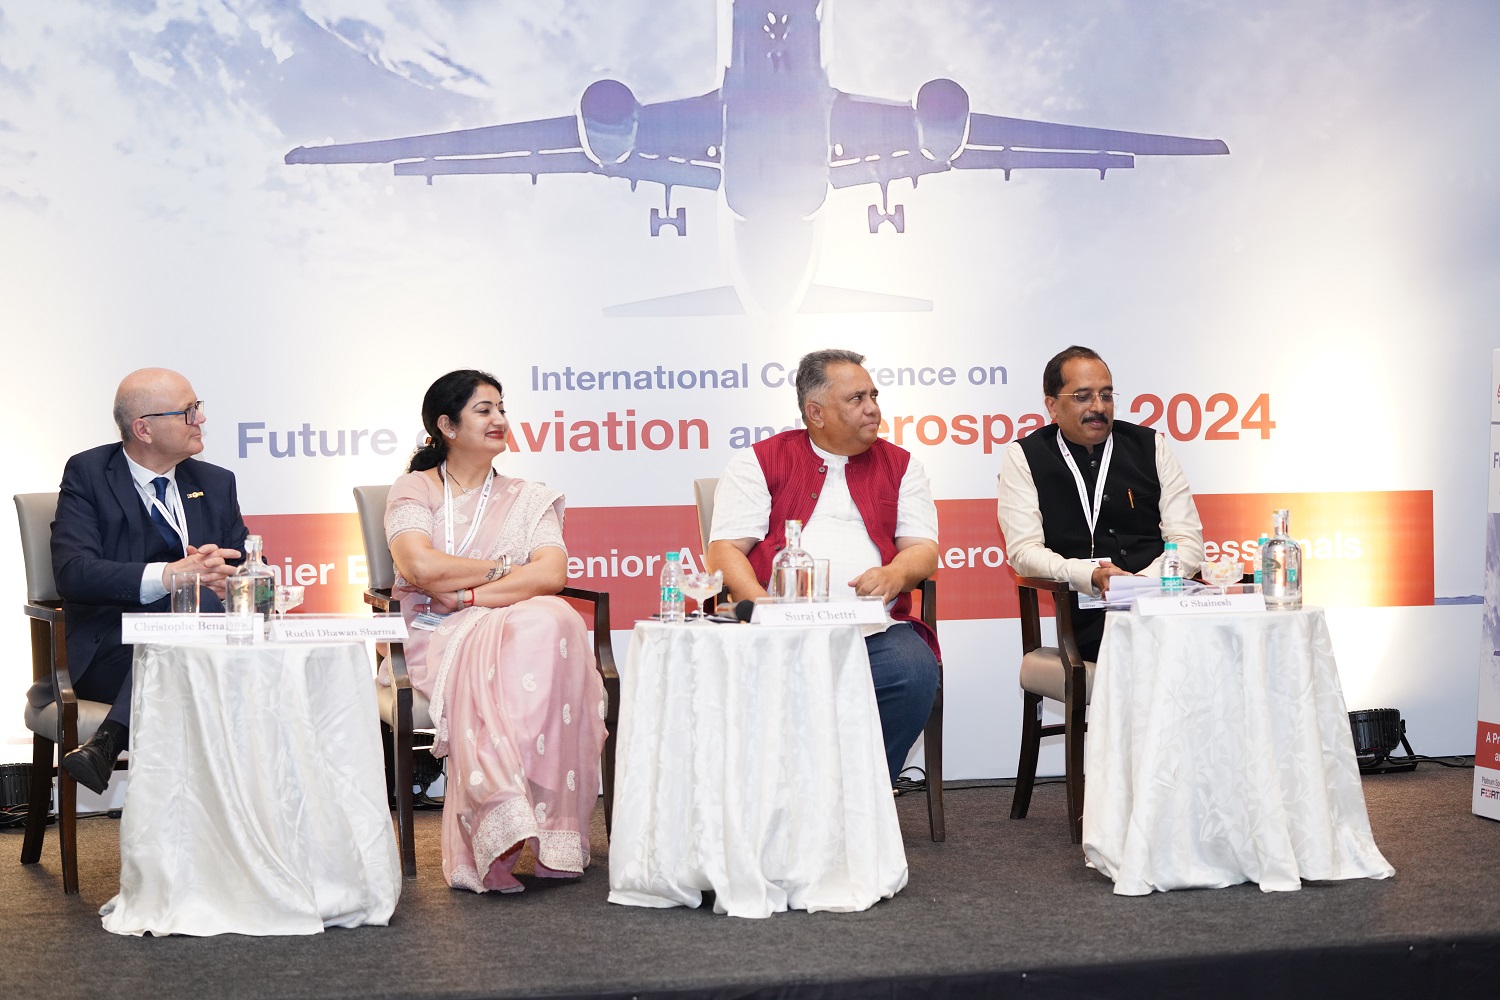 IIMB & TBS host eighth edition of International Conference on the Future of Aviation and Aerospace on 20th April 2024.